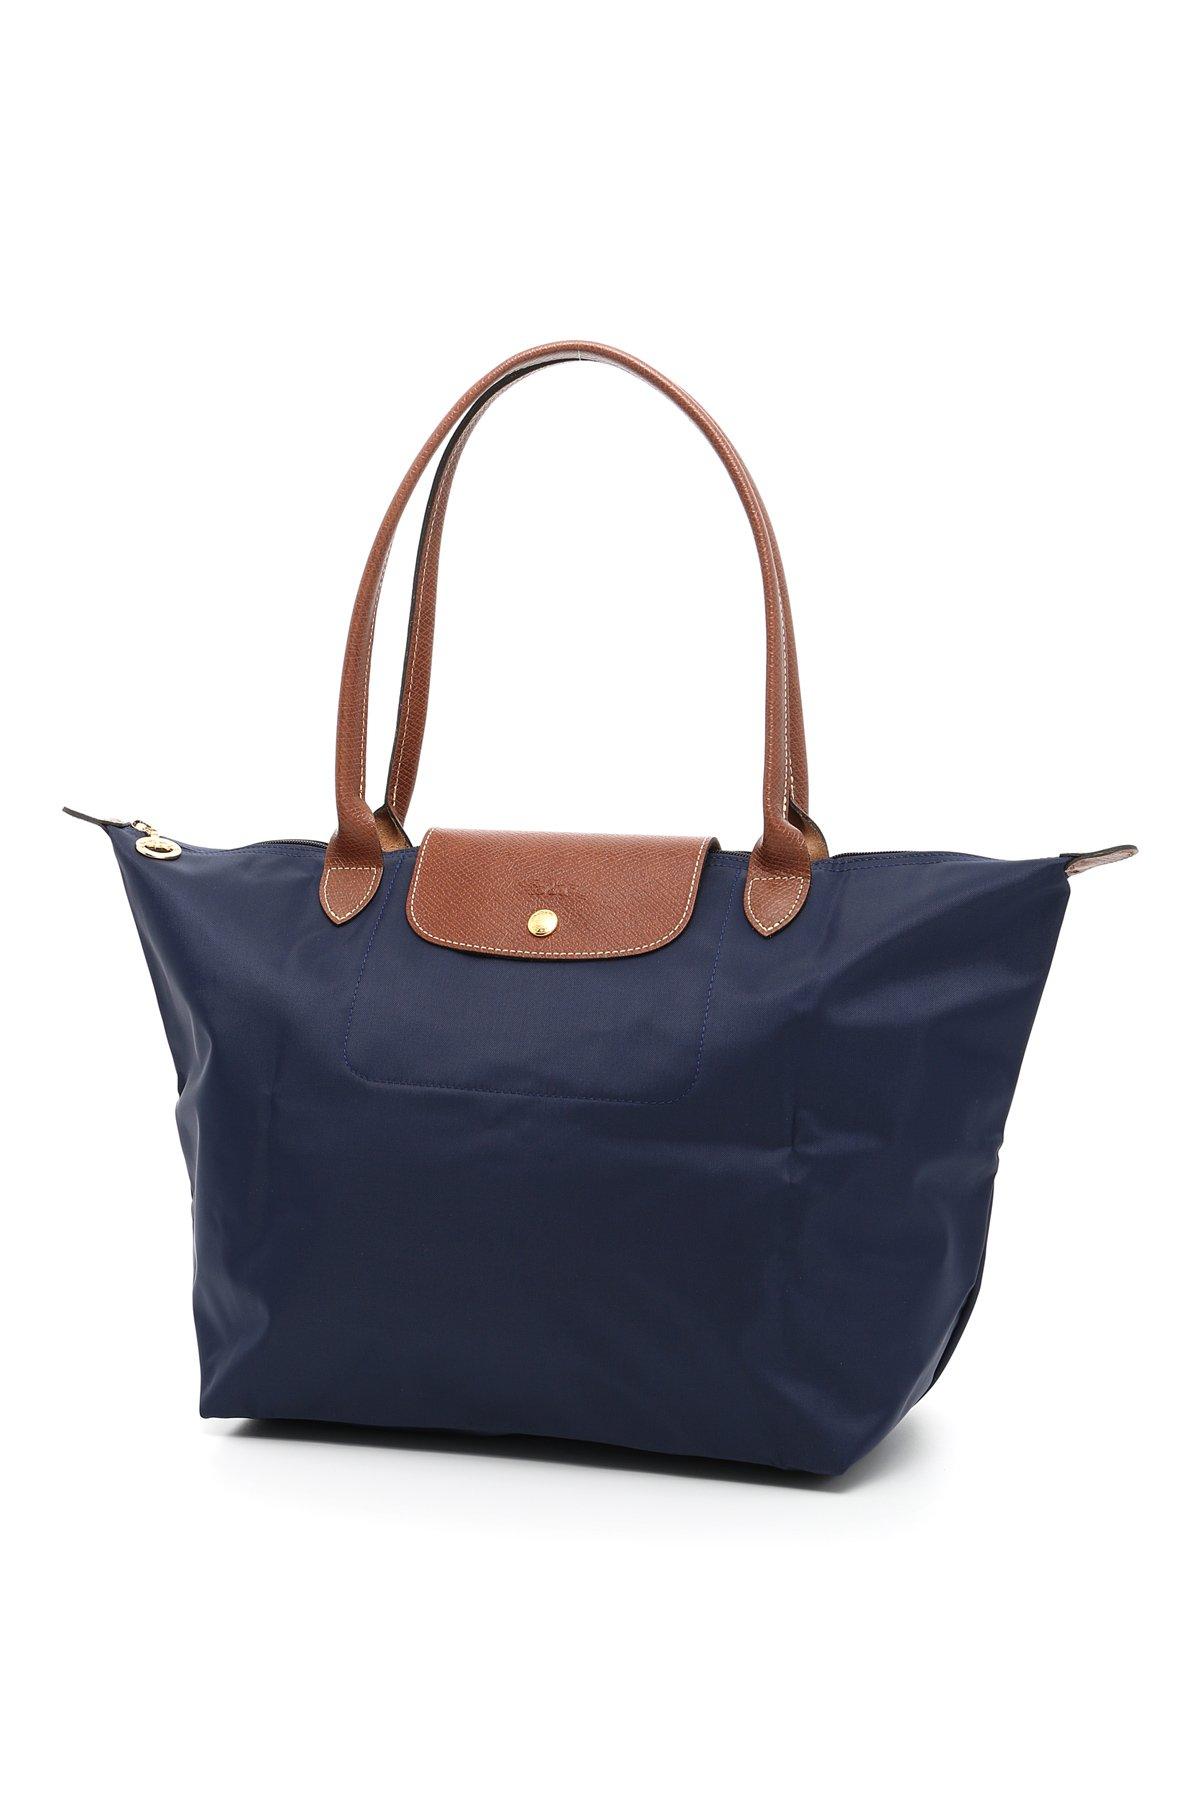 Longchamp Leather Large Le Pliage Shopping Bag in Blue - Lyst